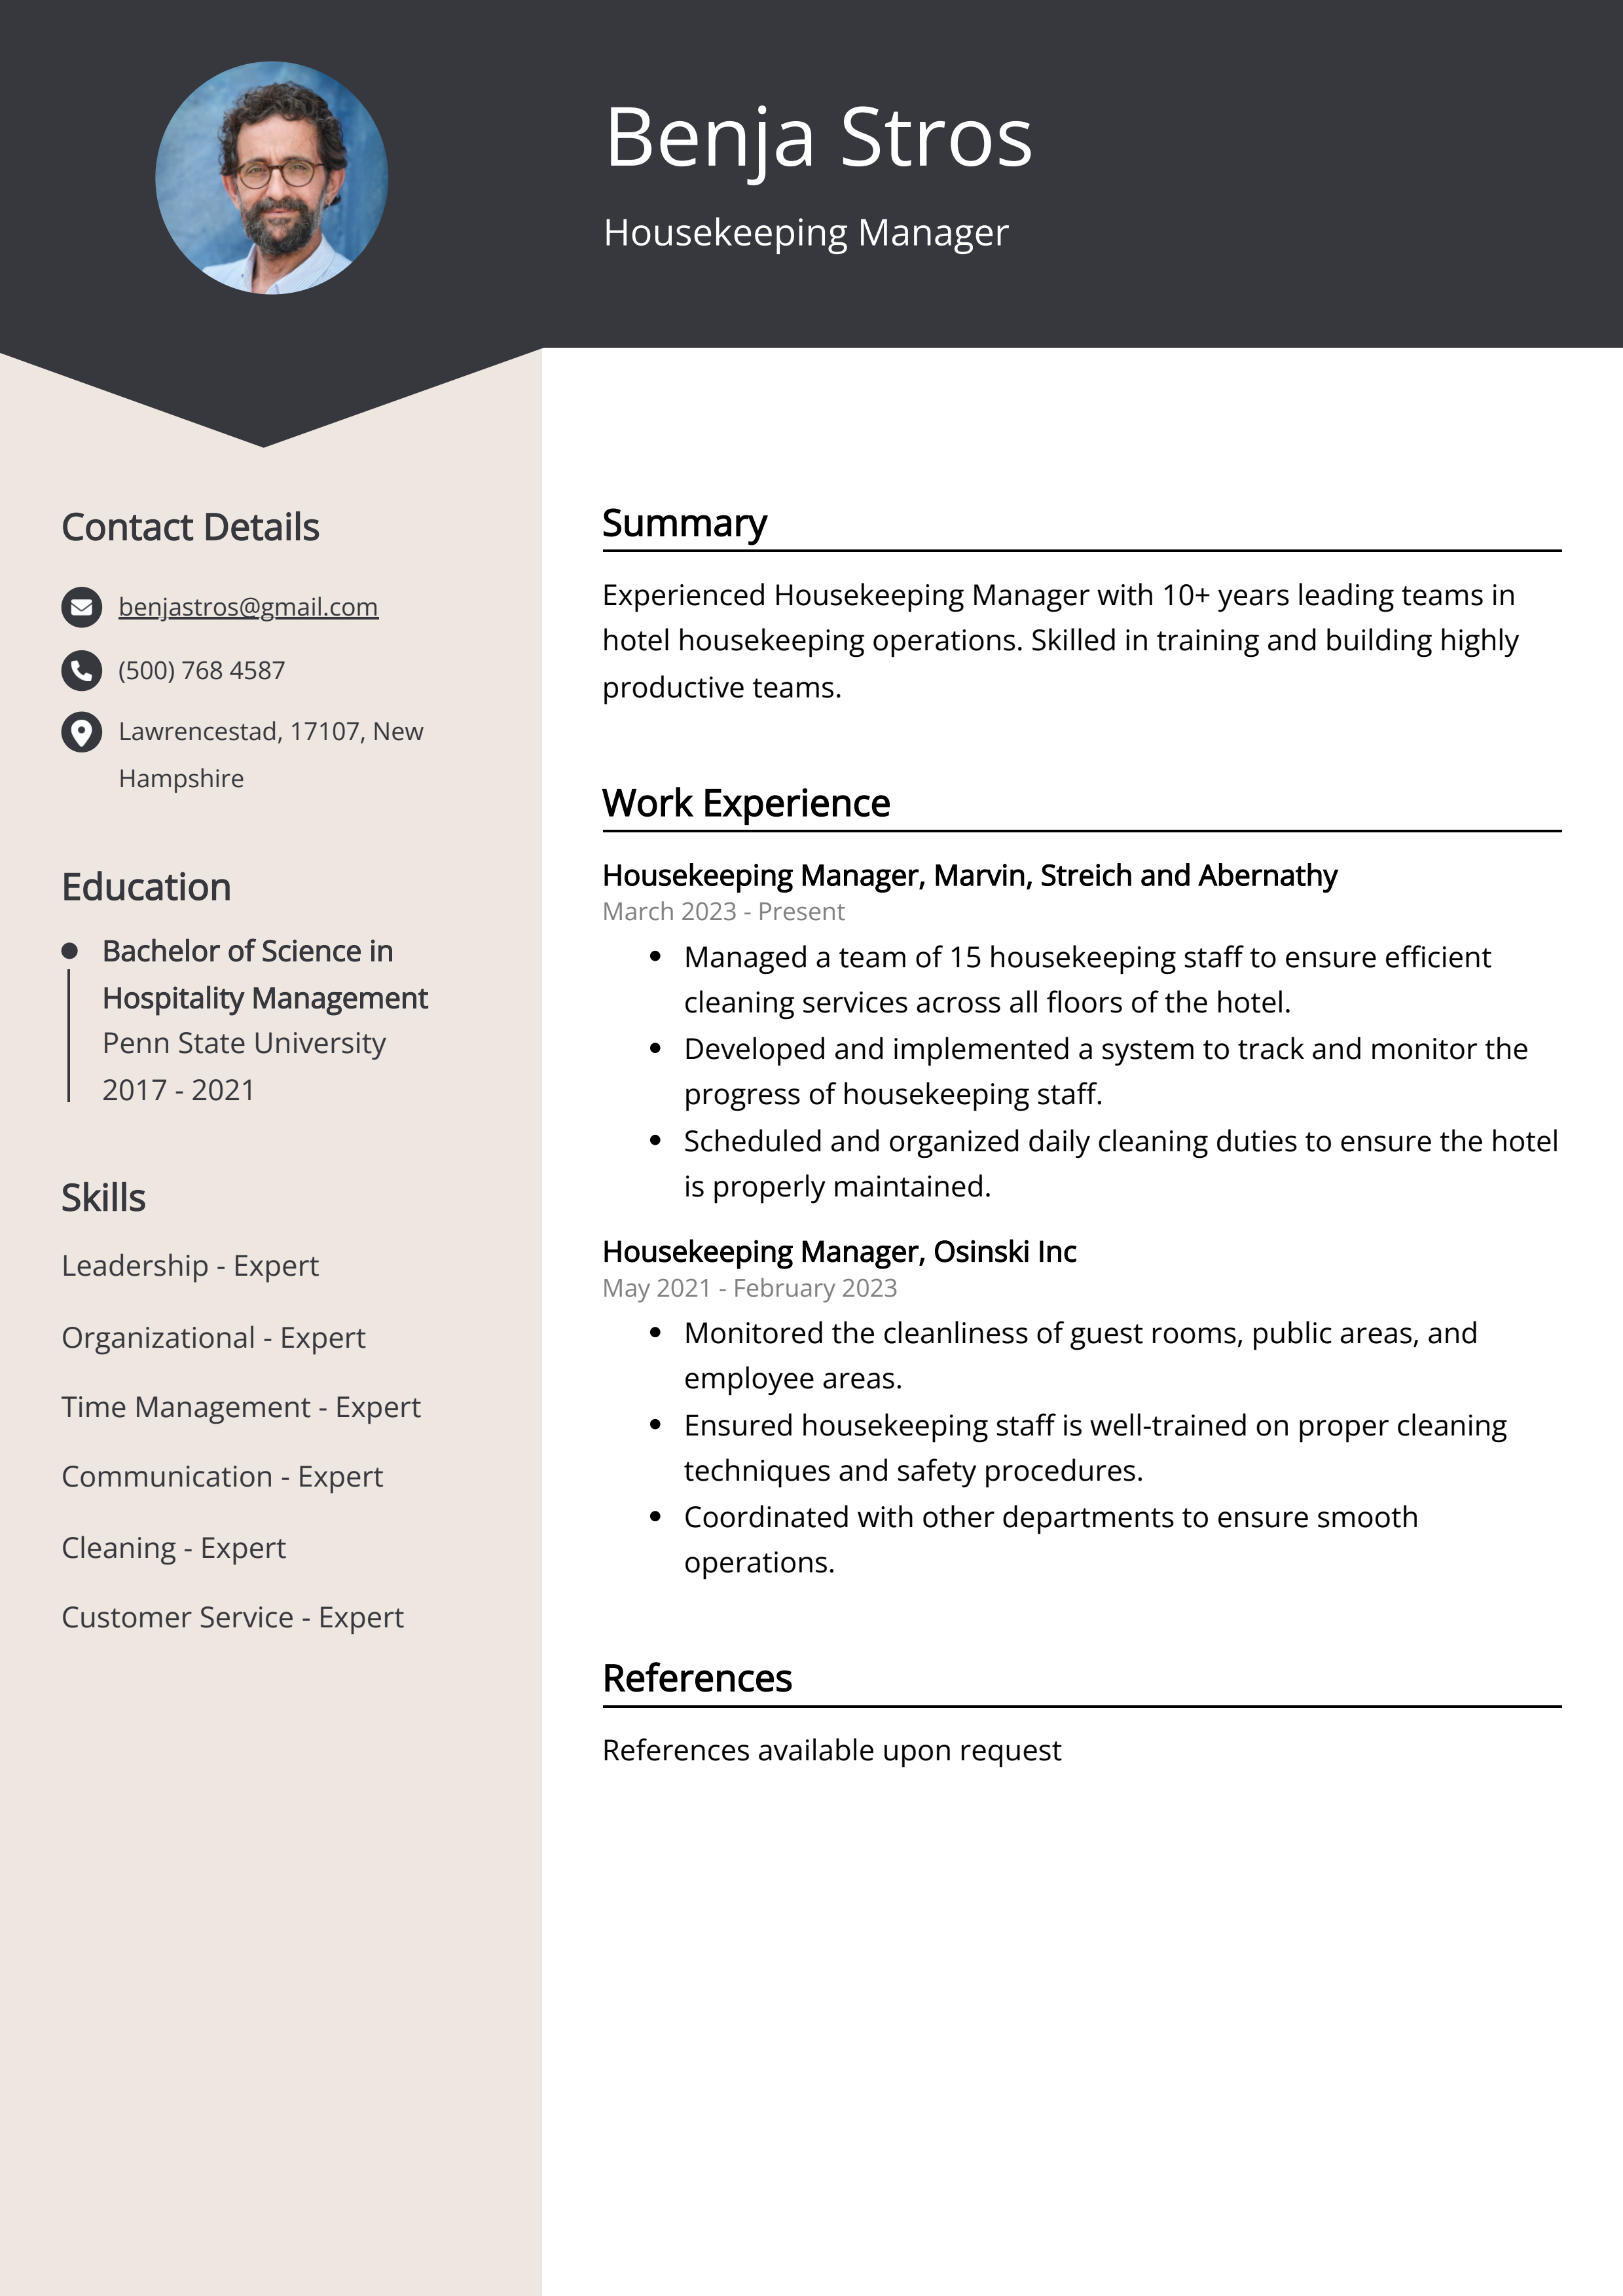 Housekeeping Manager Resume Example